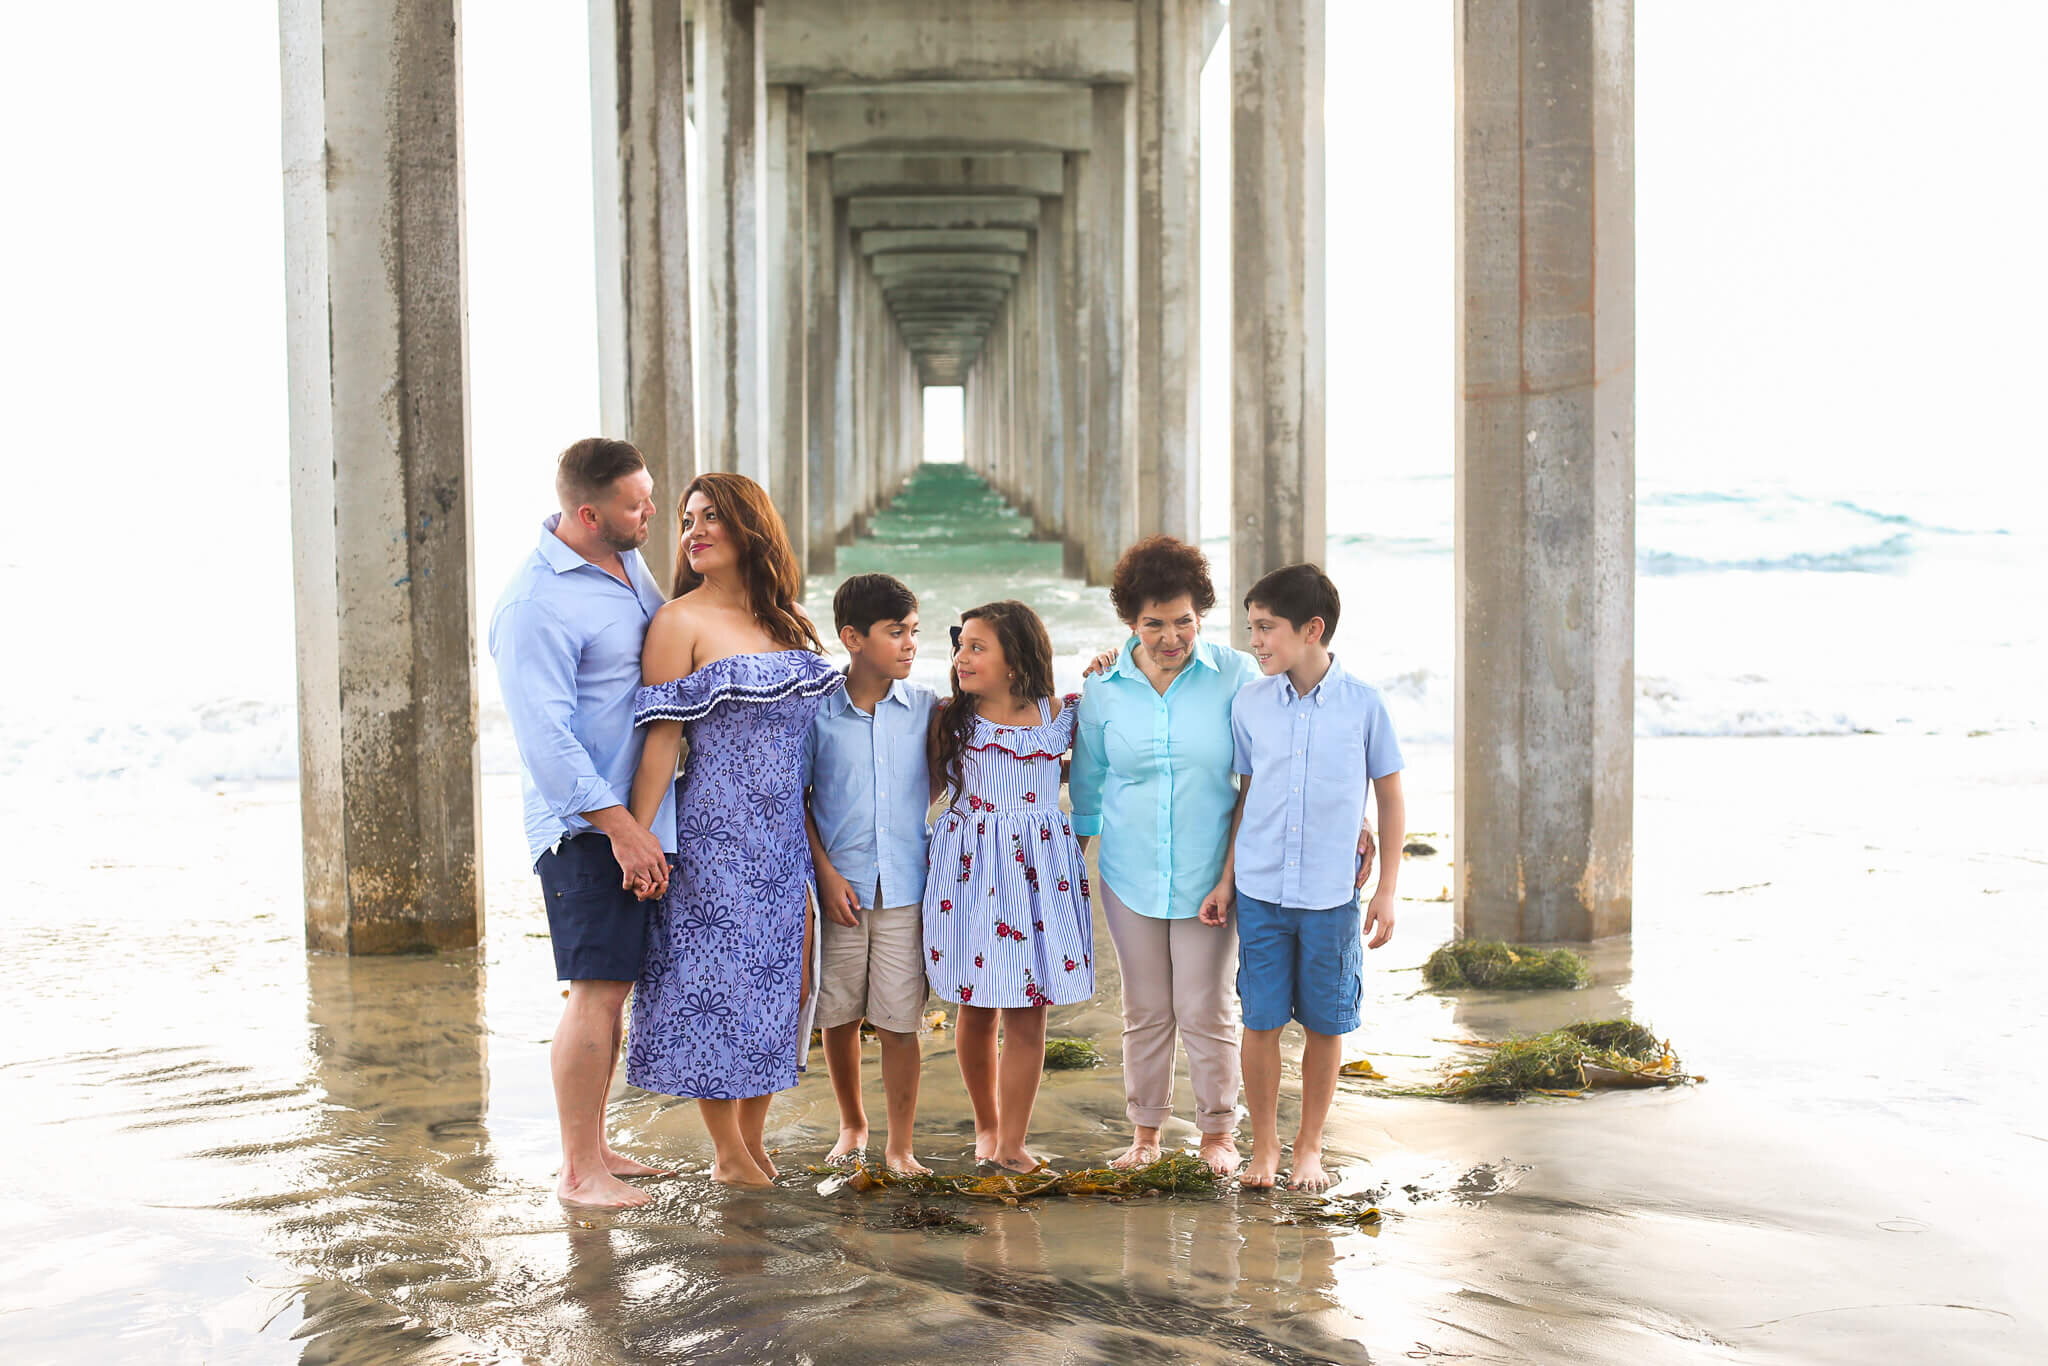  A photograph of a family standing beneath a colonnade of pillars under a pier, with the father and mother gazing fondly at each other while the three children and grandma smile together alongside them by Photography by L Rose - San Diego California 